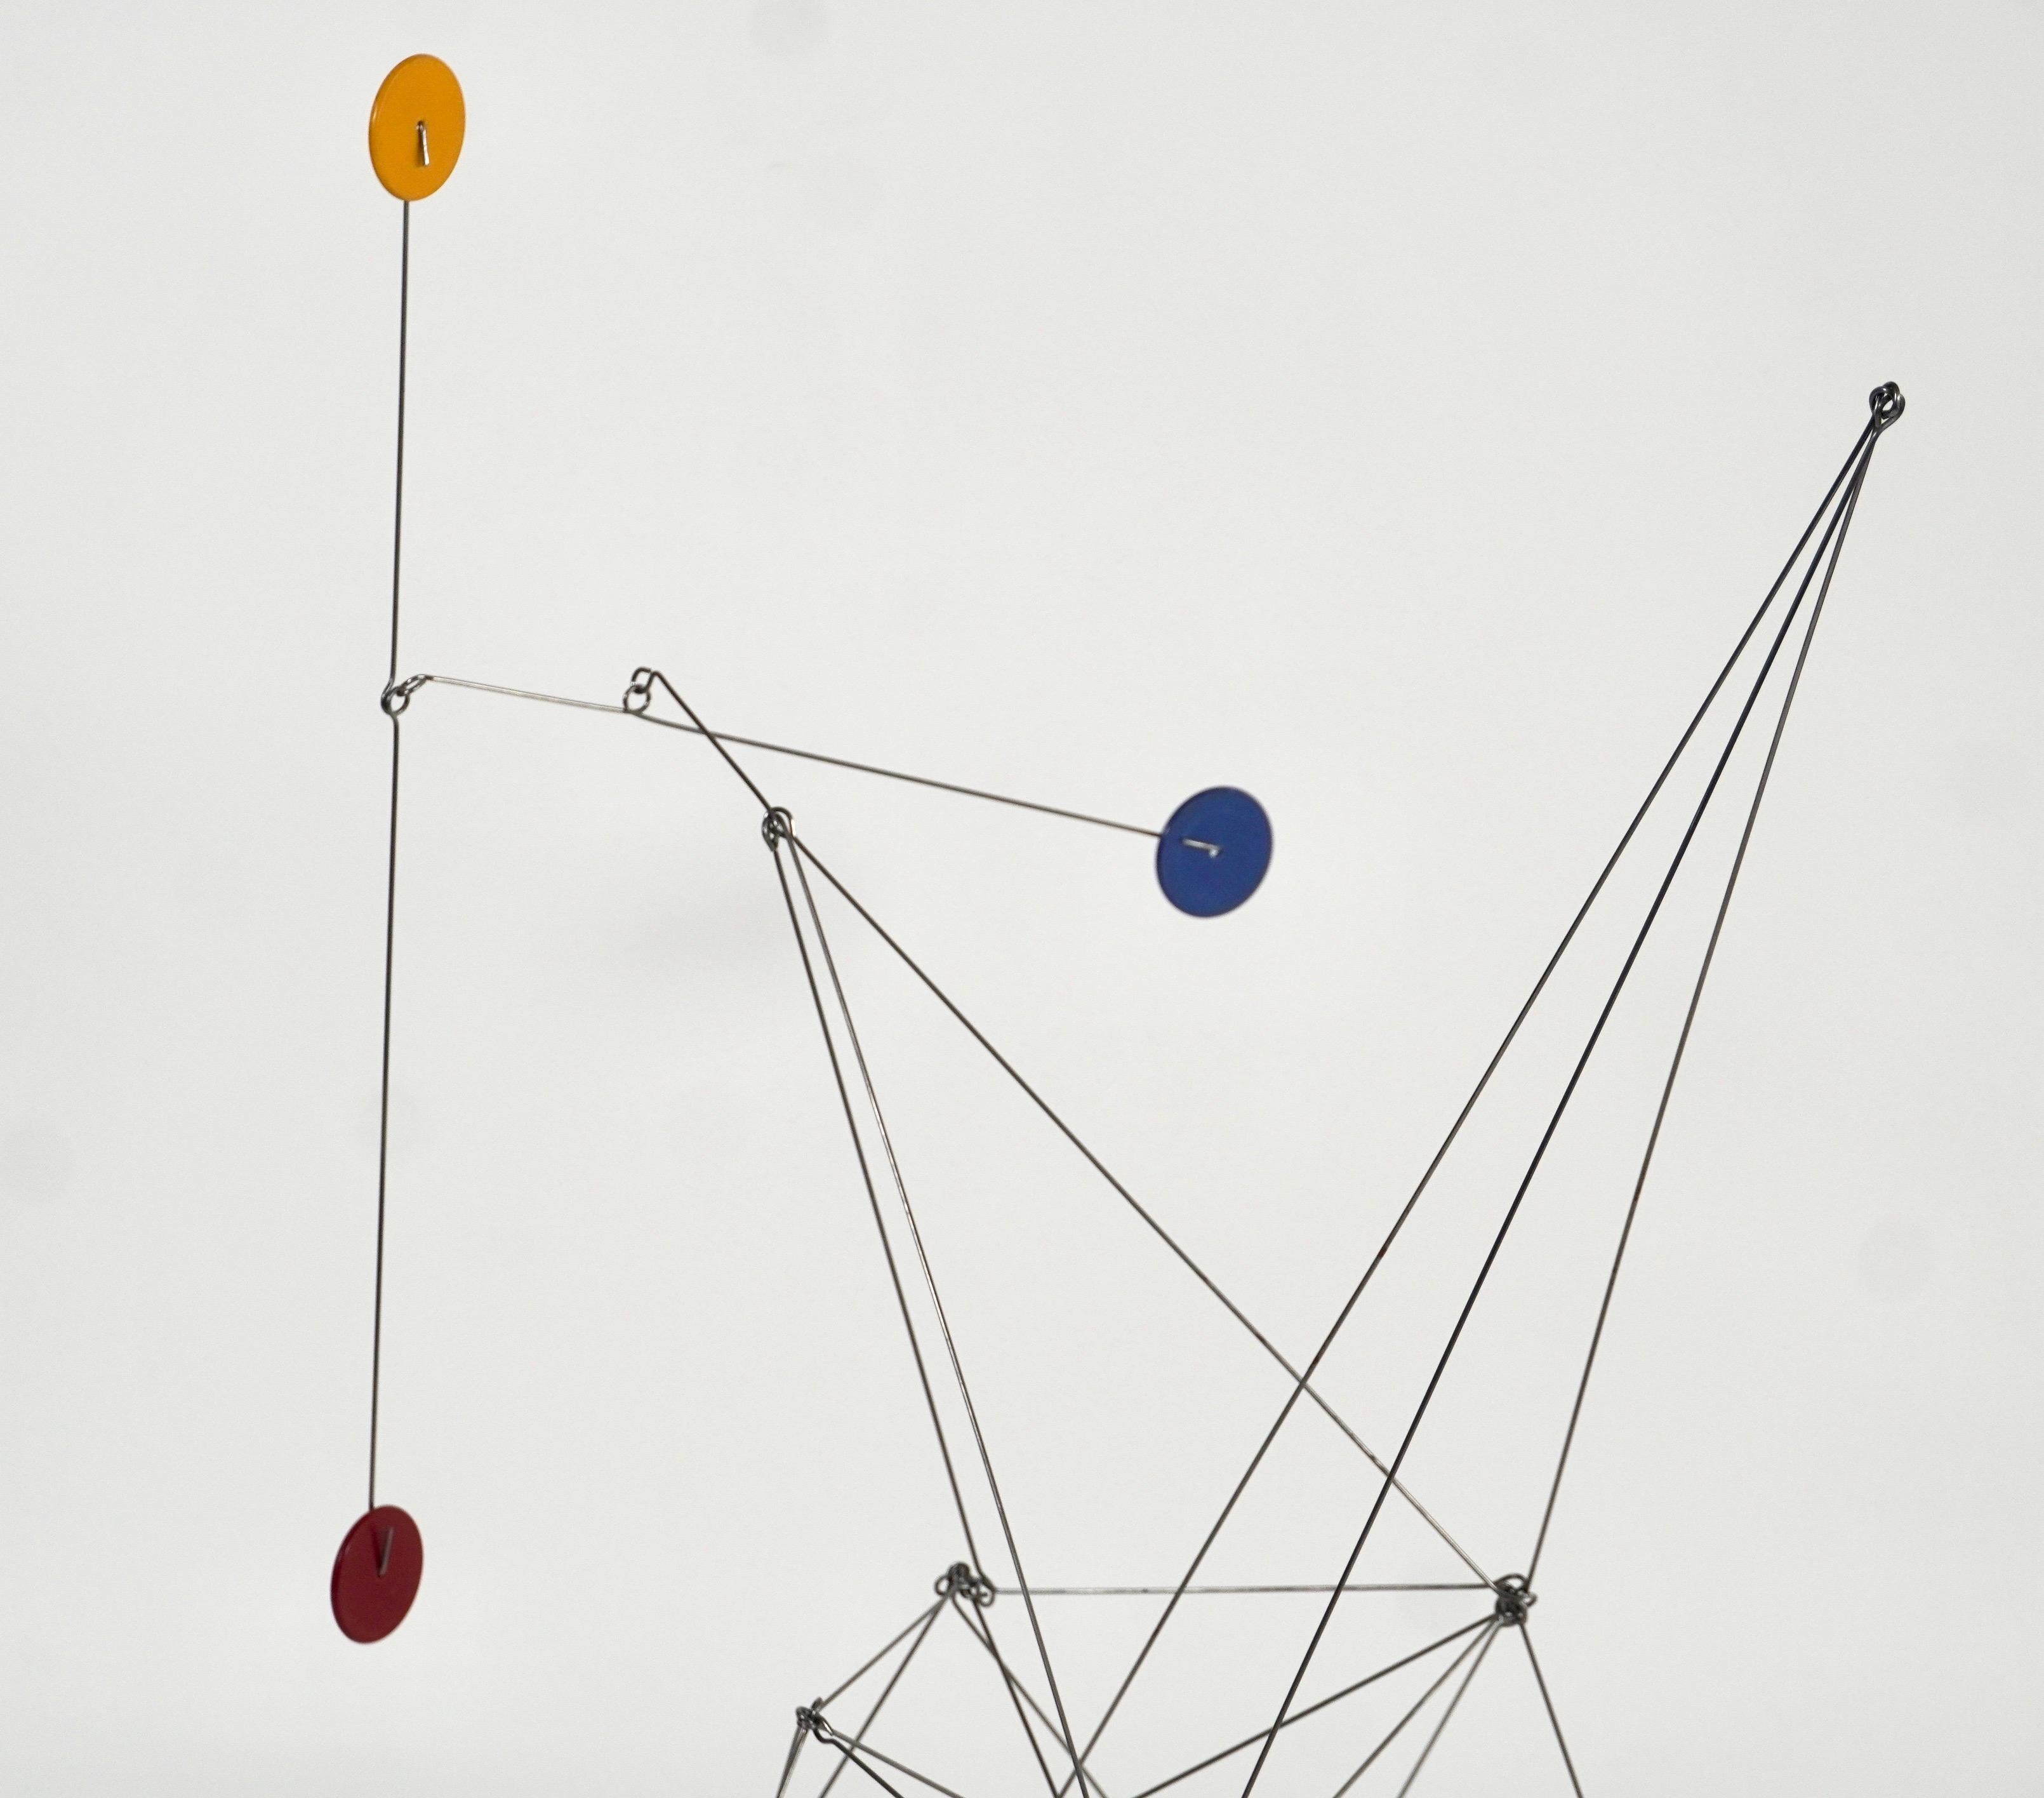 Wire mobile / kinetic sculpture by California artist Dan Levin with a complicated array of wire connections for the main body of the sculpture with a mobile arm with 3 colorful discs that are counterbalanced and move freely when touched.